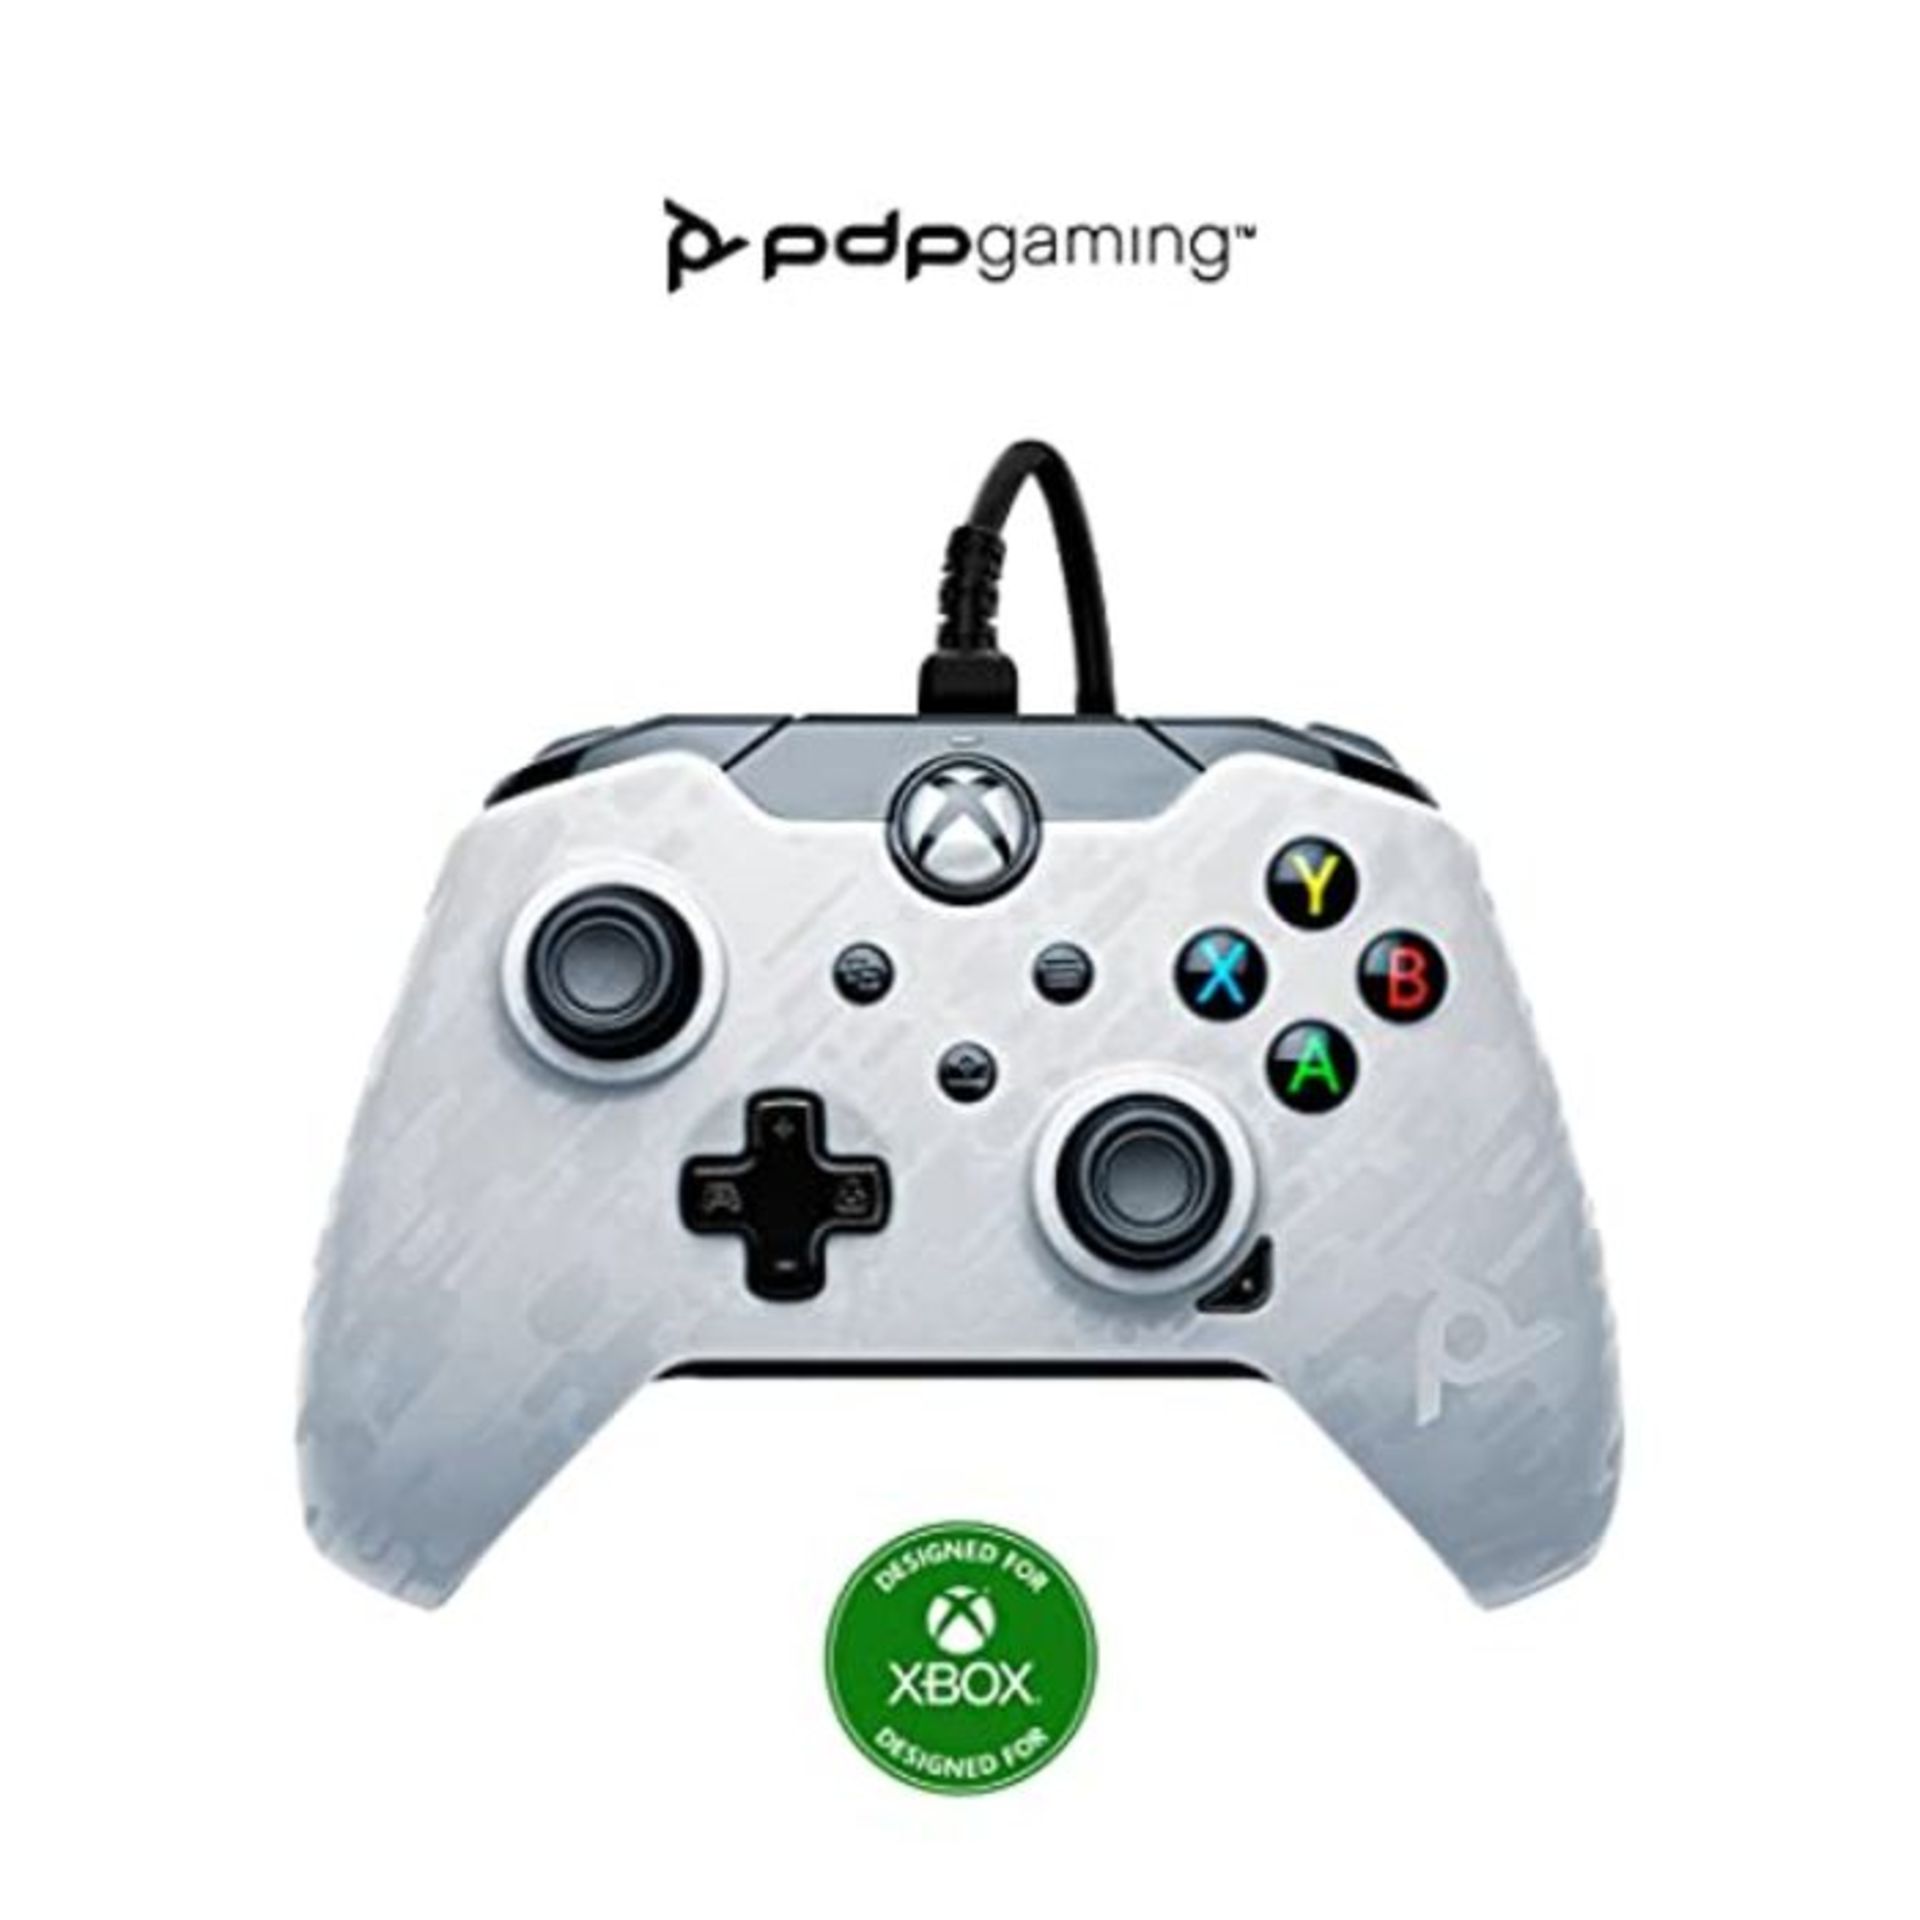 PDP Wired Game Controller - Xbox Series X|S, Xbox One, PC/Laptop Windows 10, Steam Gam